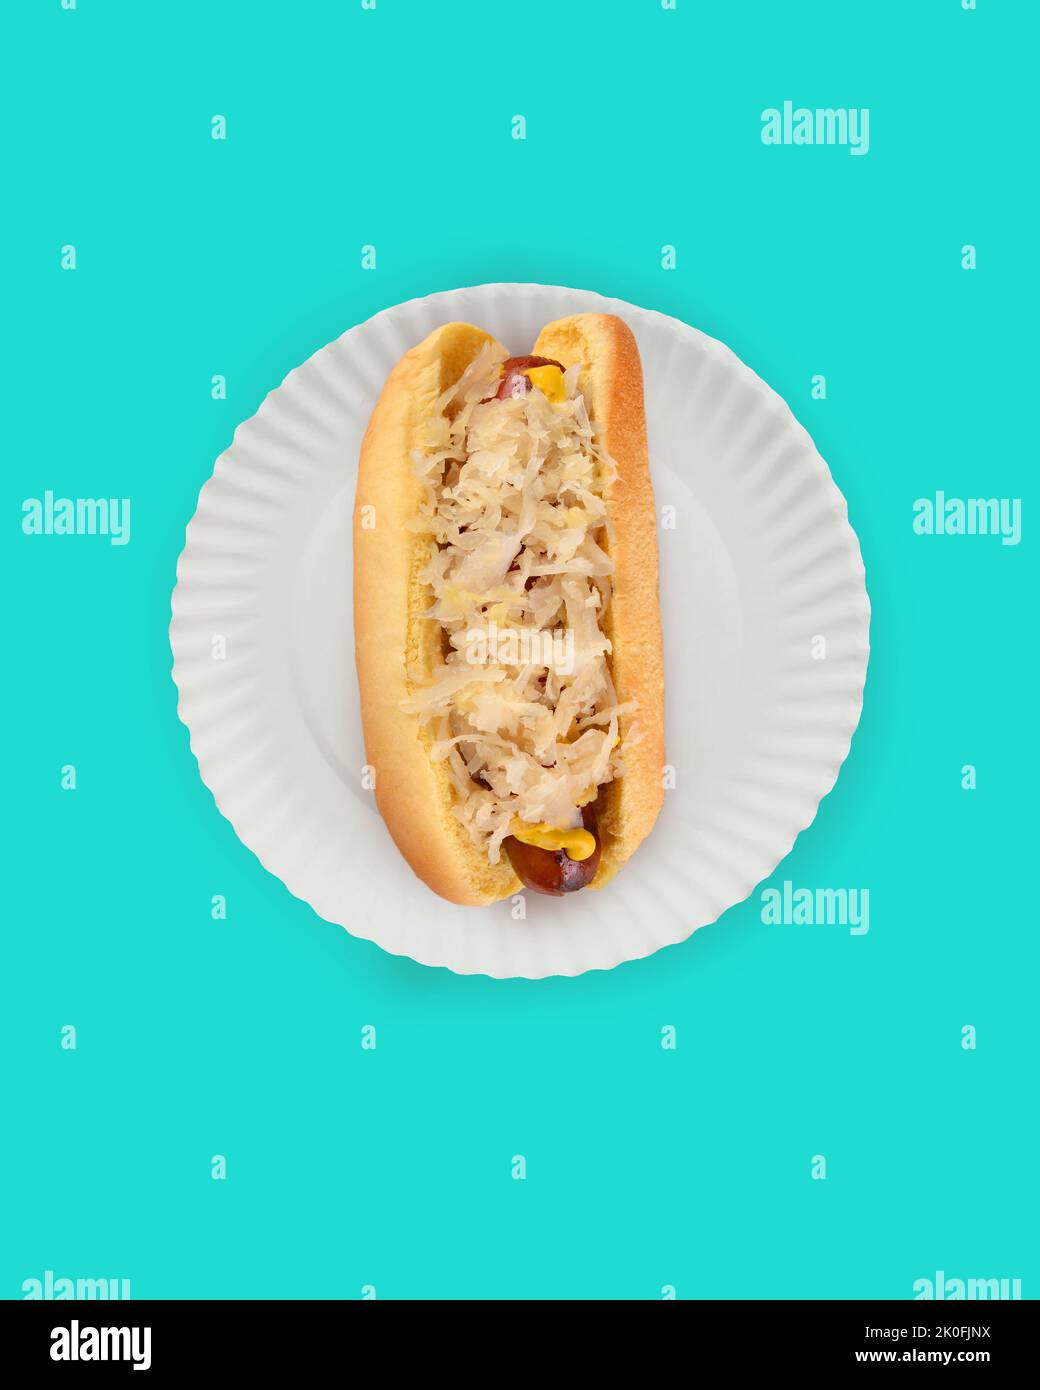 Flat Lay Hot Dog in Bun Still Life. Fankfurter in bun with Sauerkraut on a white paper plate on teal background with copy space. Stock Photo